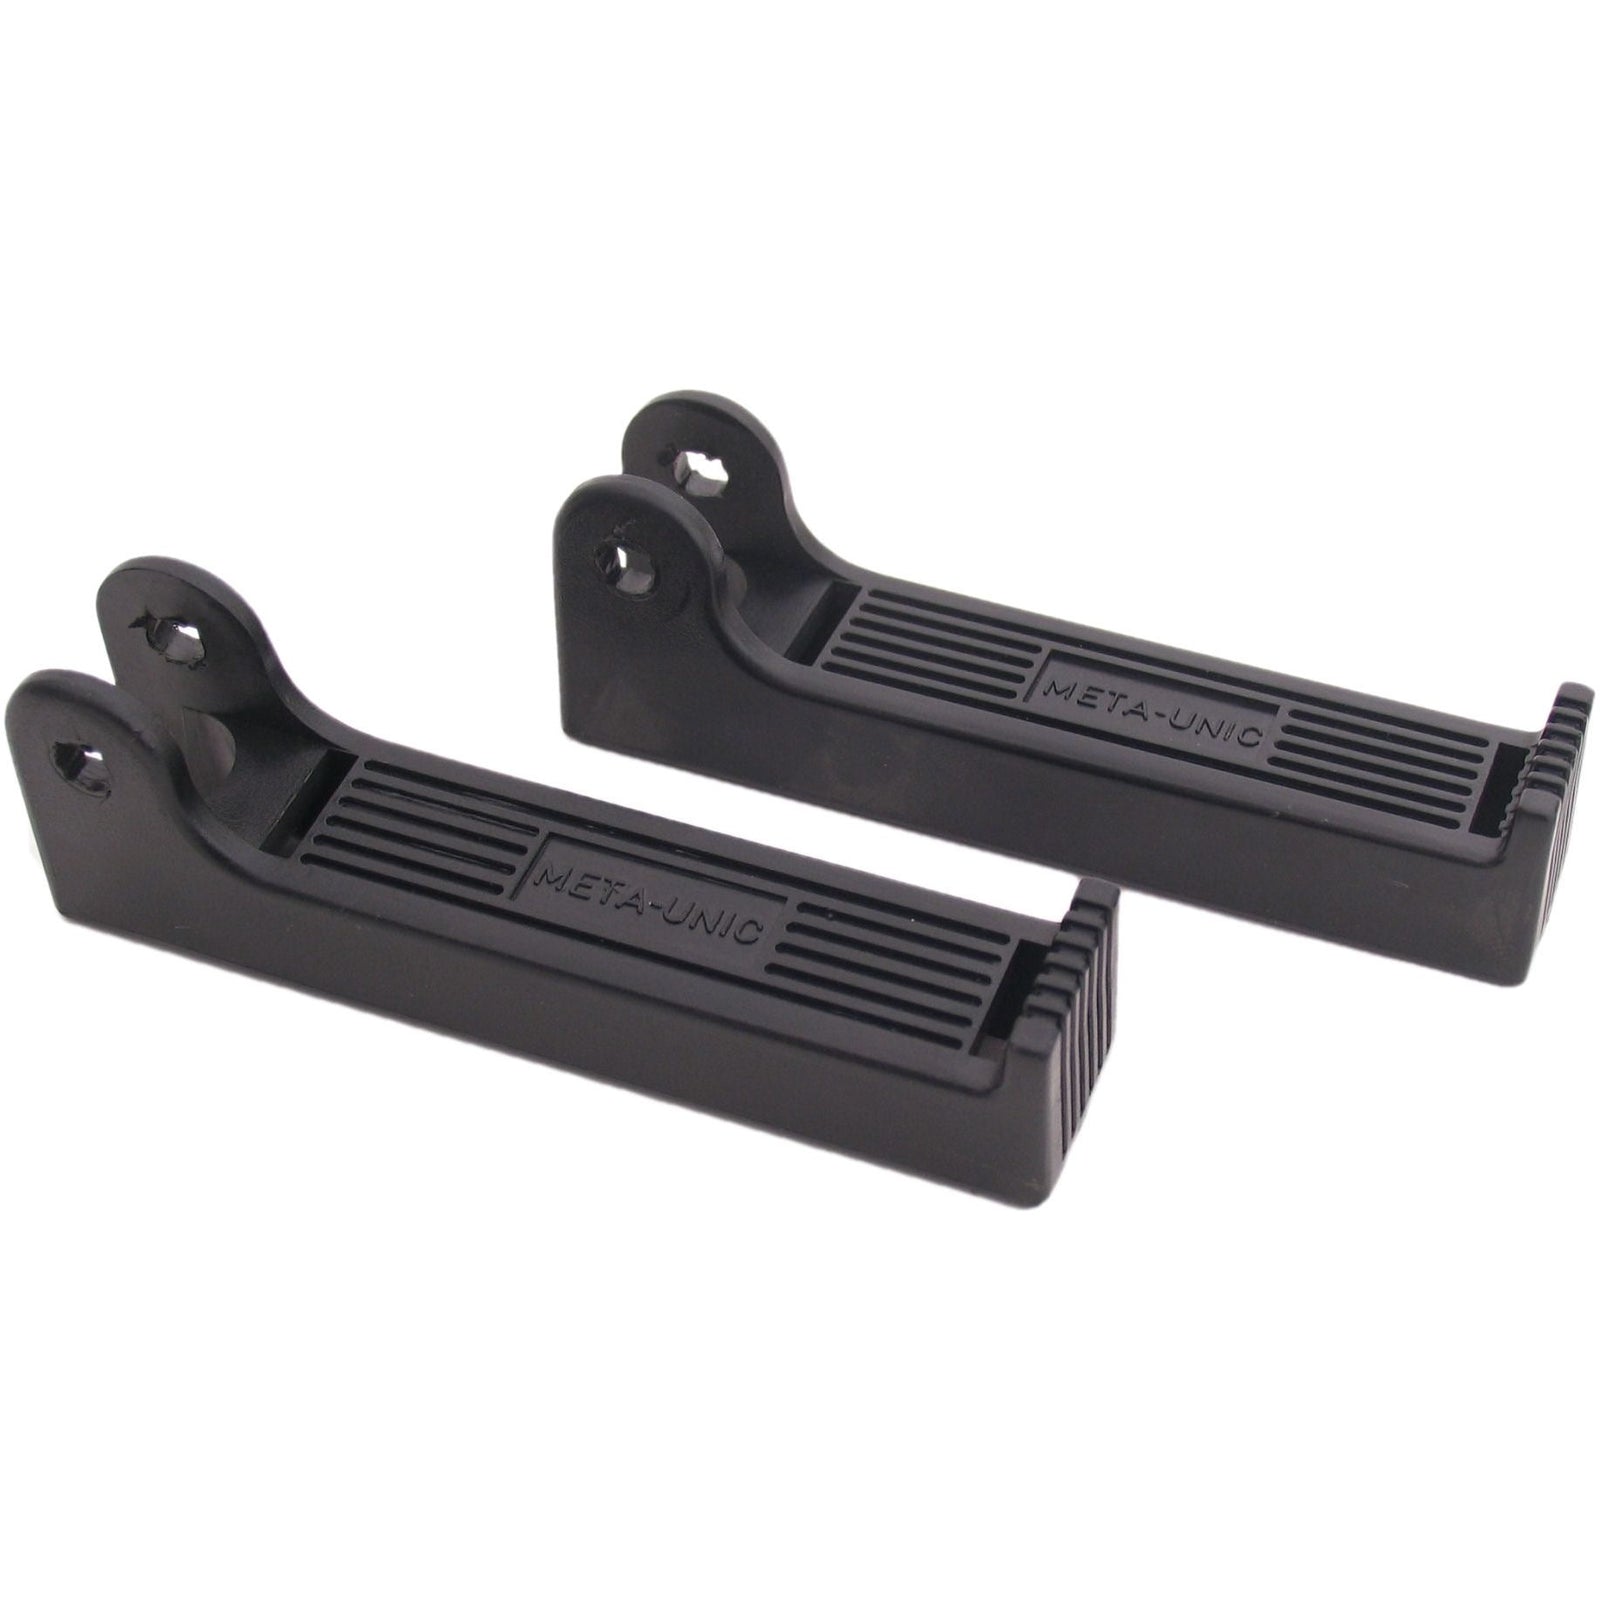 Thule Yepp footrest set for Duo